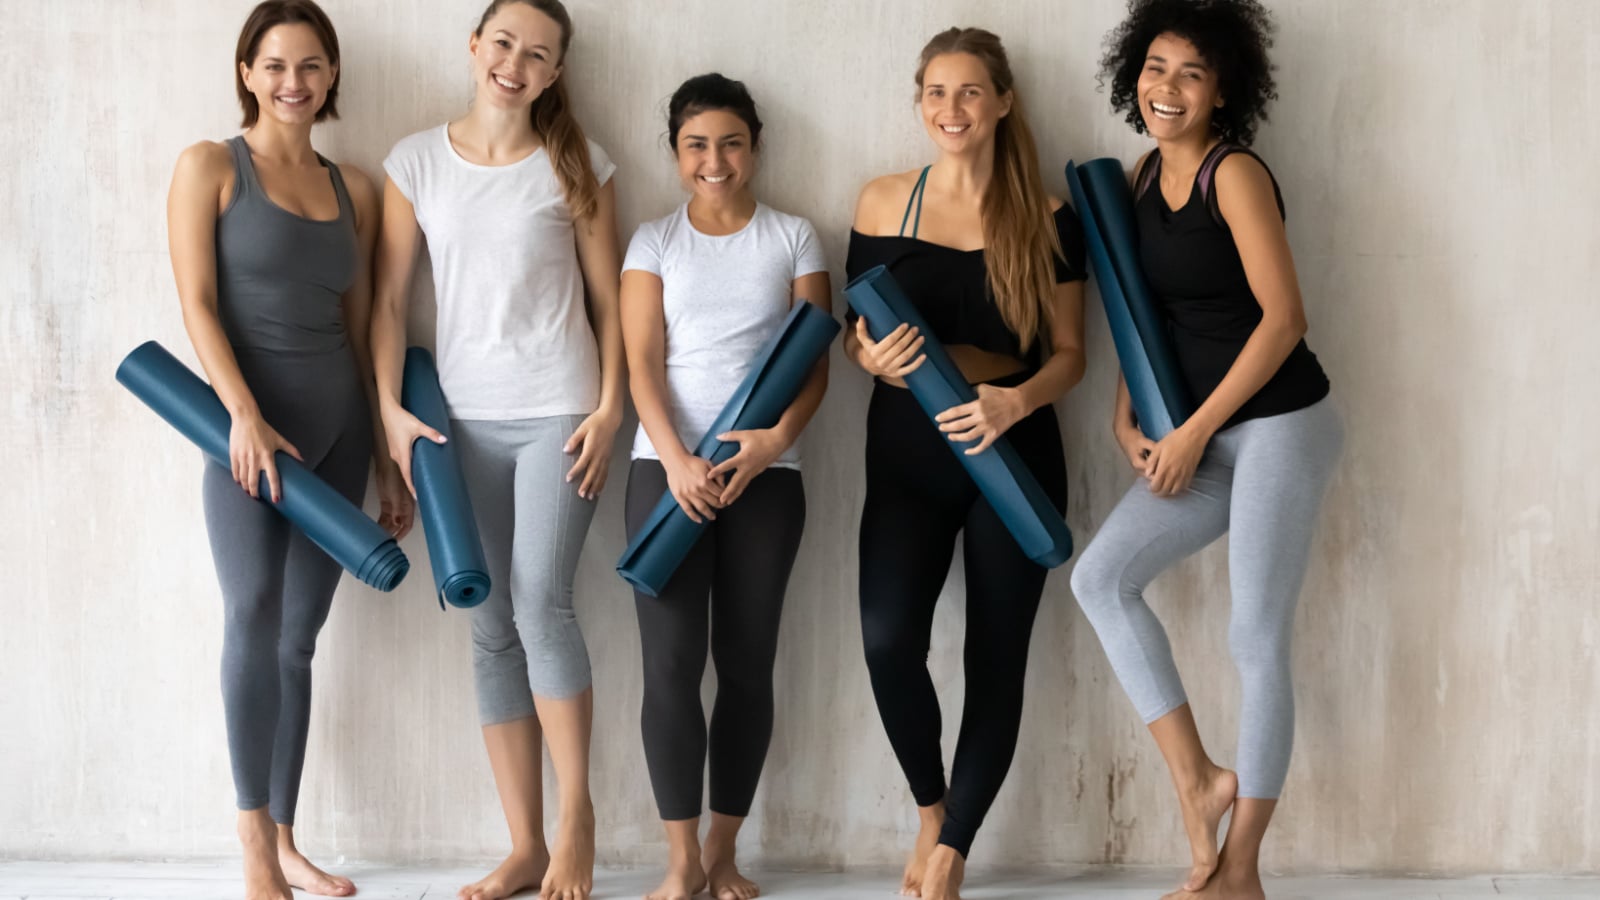 Multicultural millennial students girls holding mats resting after work out posing smiling looking at camera, activewear fashion store advertisement, sport club studio gym instructors portrait concept